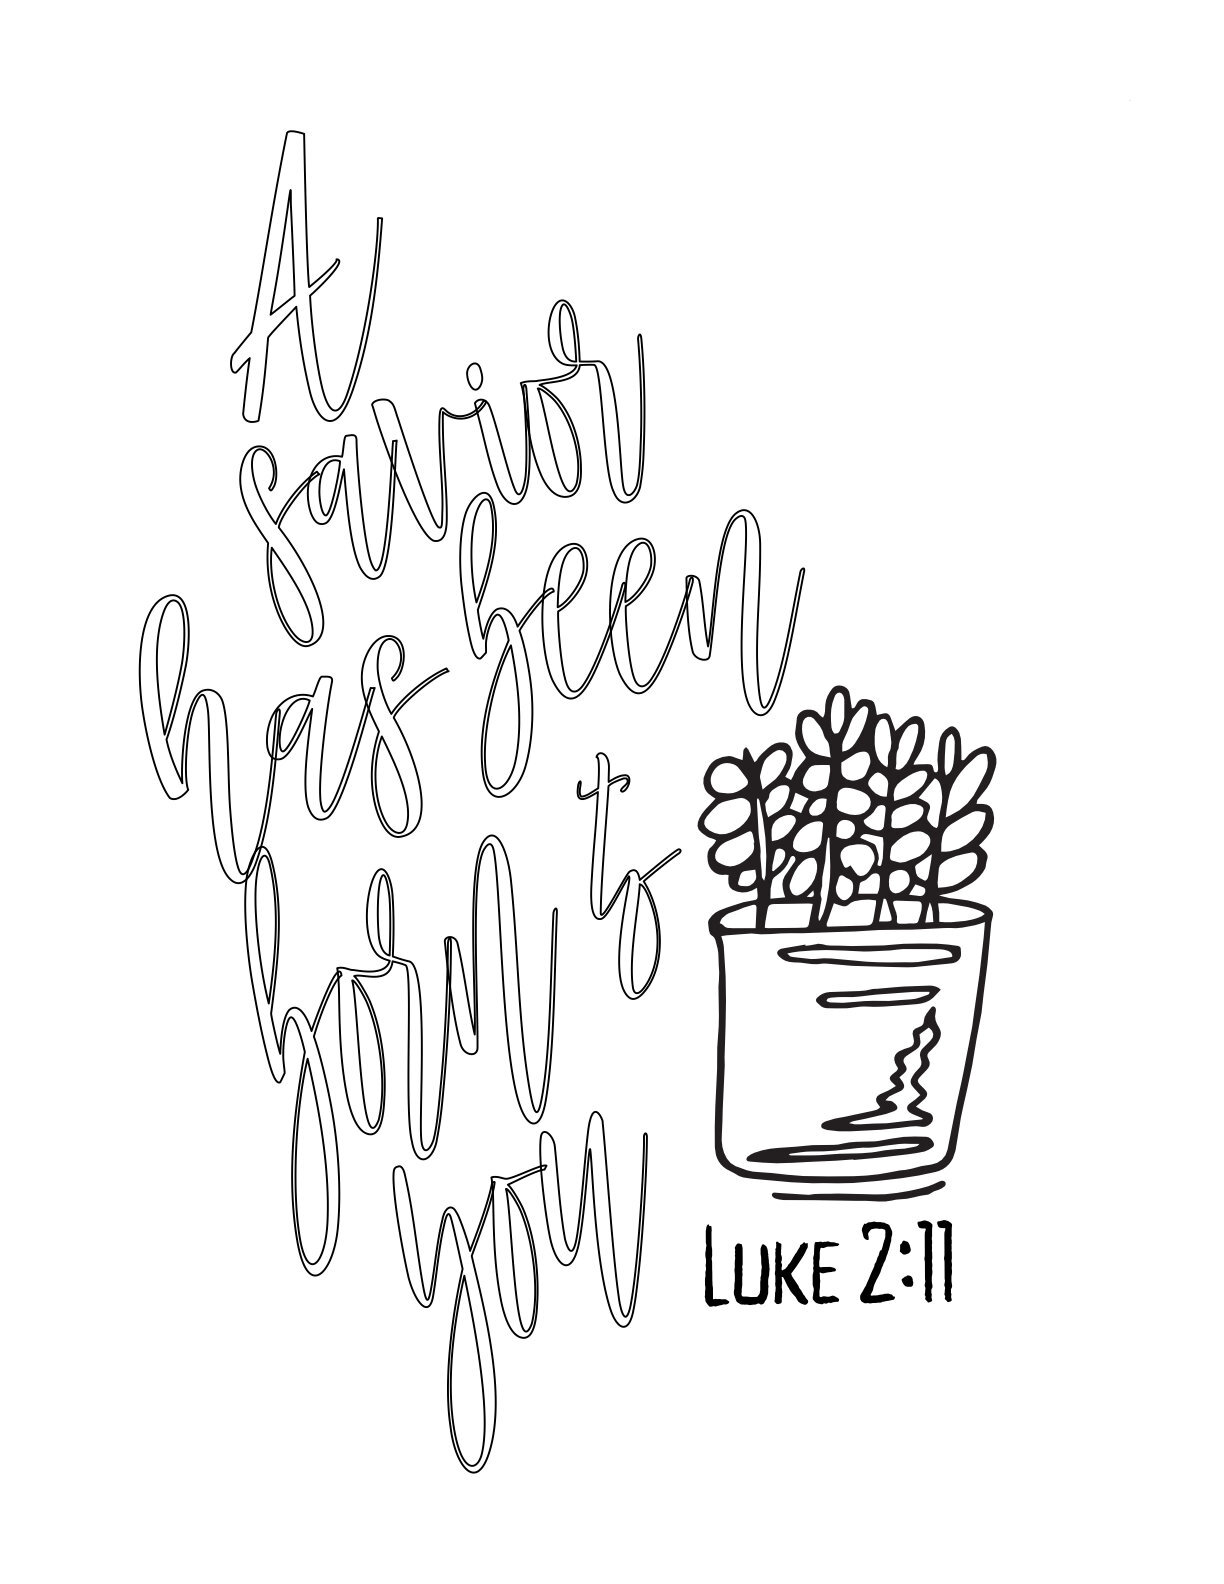 colorable text - A Savior Has Been Born To You - Luke 2:11  CLICK HERE TO DOWNLOAD YOUR FREE PRINTABLE CHRISTMAS COLORING SHEET